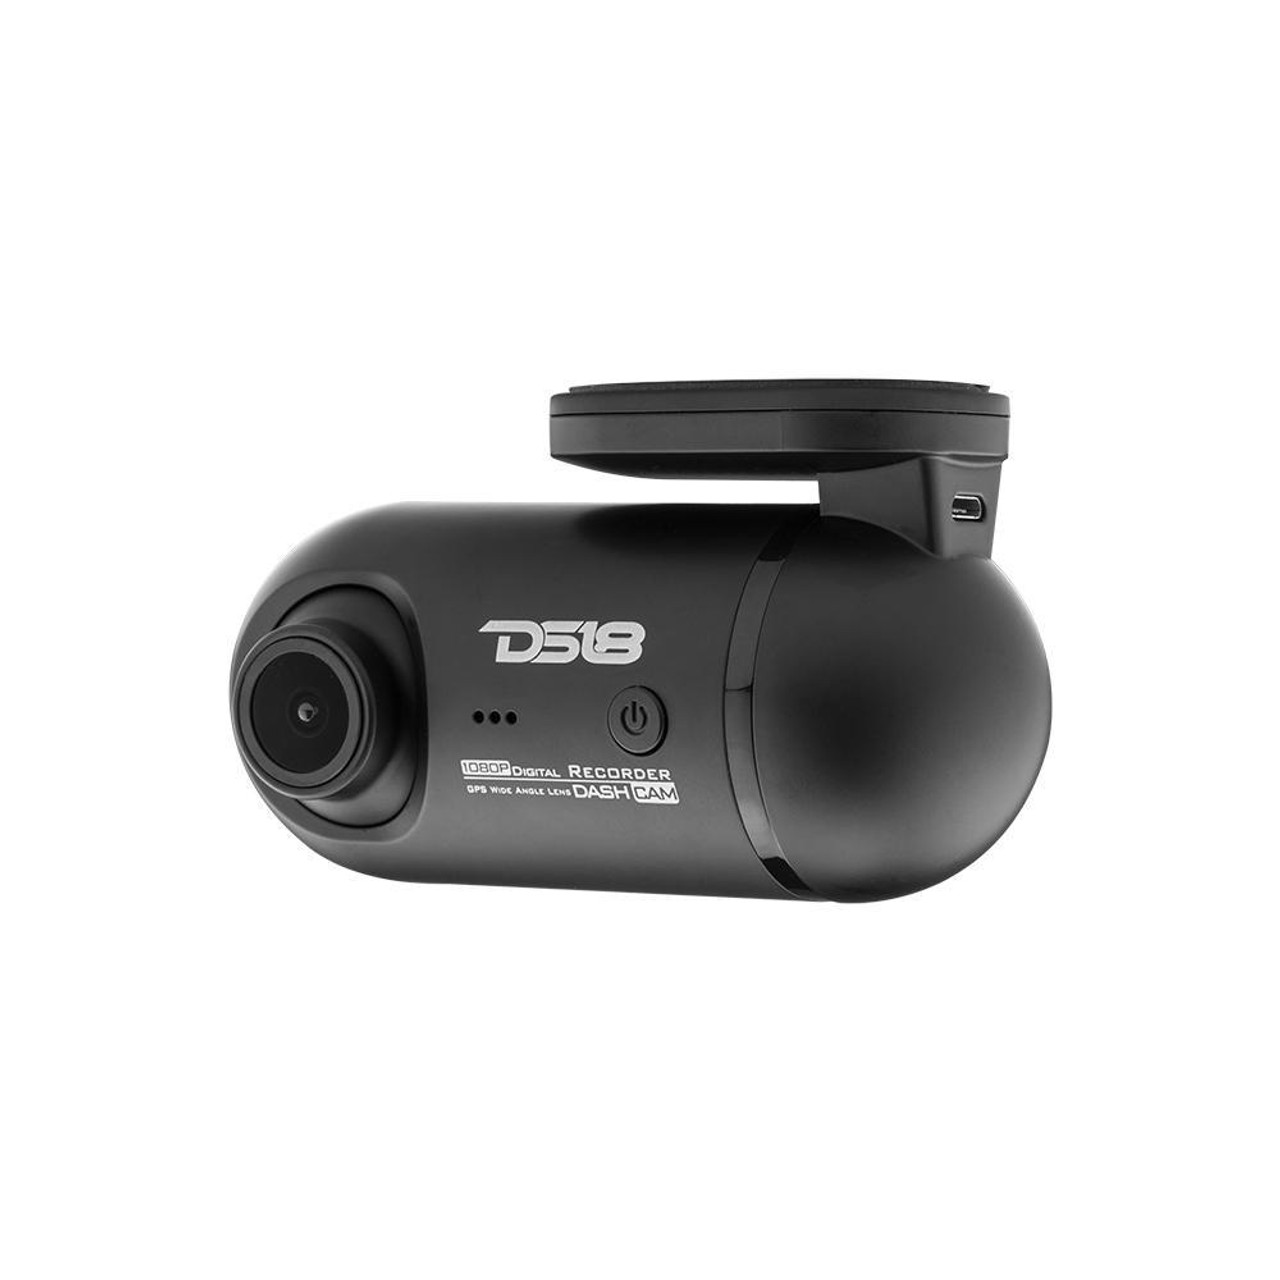 https://cdn11.bigcommerce.com/s-209k8v1/images/stencil/1280x1280/products/18938/38899/ds18-audio-ds18-bbx2-detachable-dvr-dash-cam-with-2.45-screen-front-and-rear-camera-1080hd-gps-and-wi-fiadas__28905.1658935662.jpg?c=2&imbypass=on